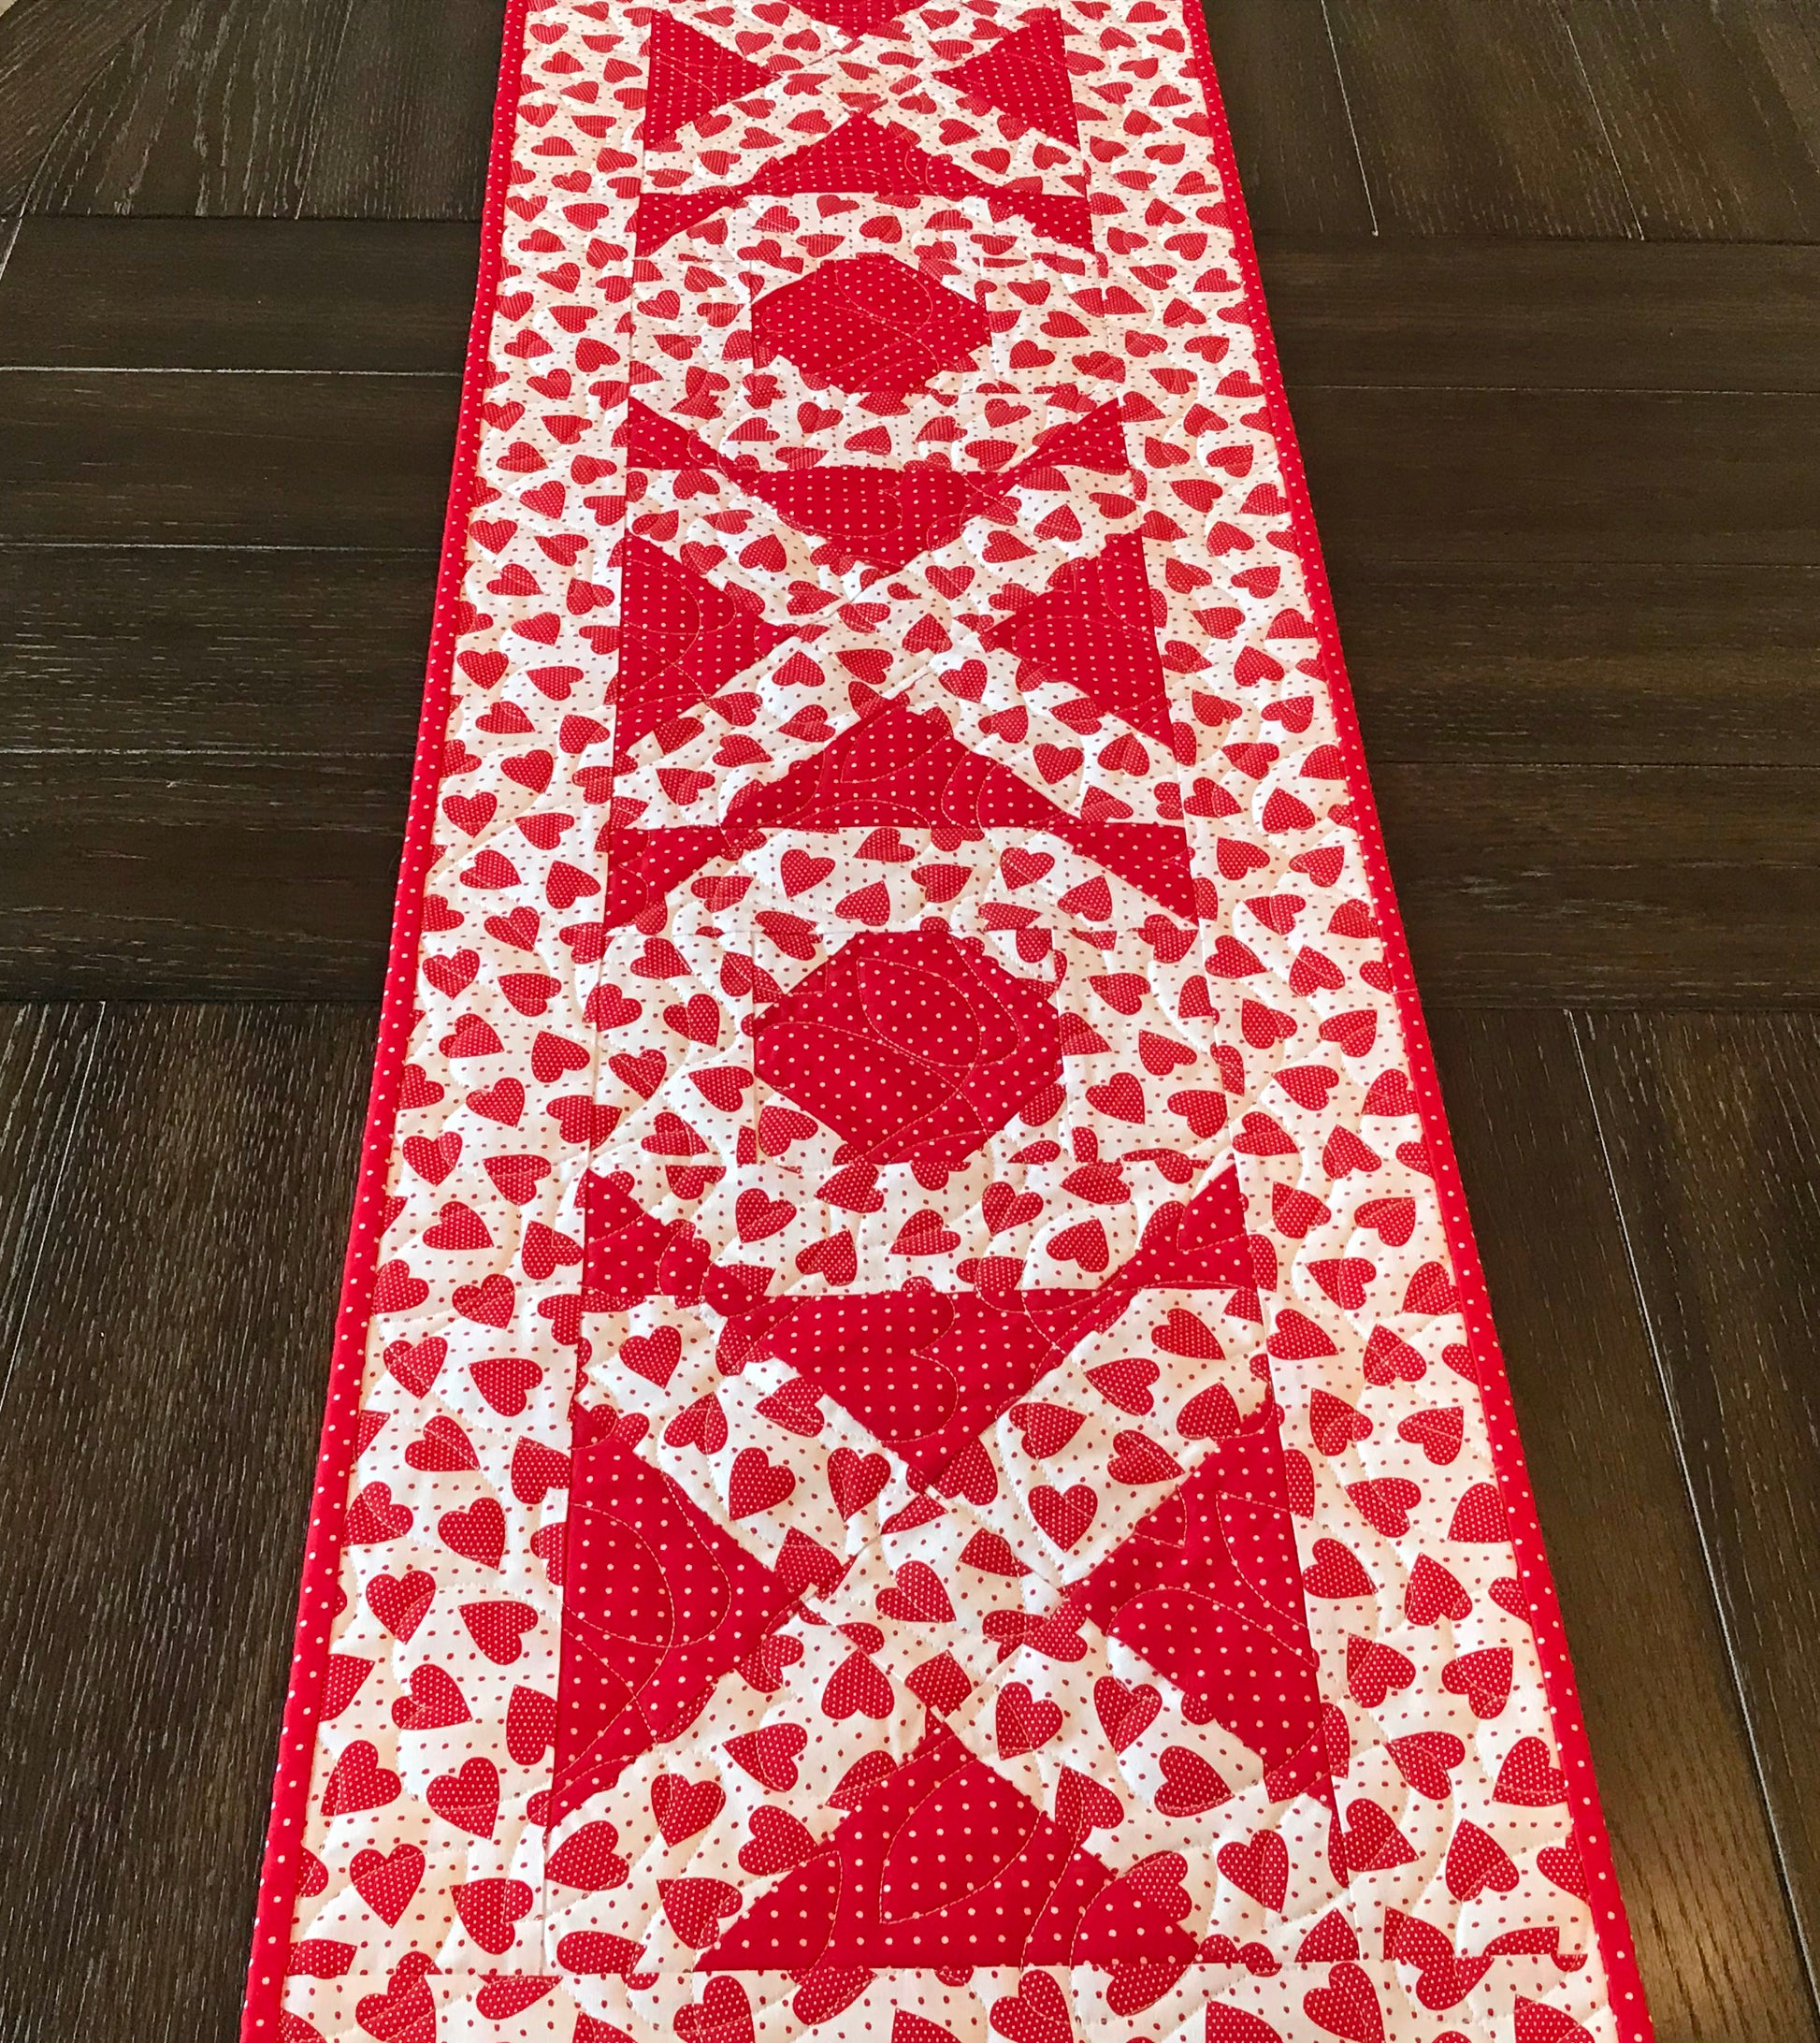 Hugs & Kisses Valentine's Day Table Runner Pattern - Digital Pattern - Handmade Quilts, Digital Patterns, and Home Décor items online - Cuddle Cat Quiltworks